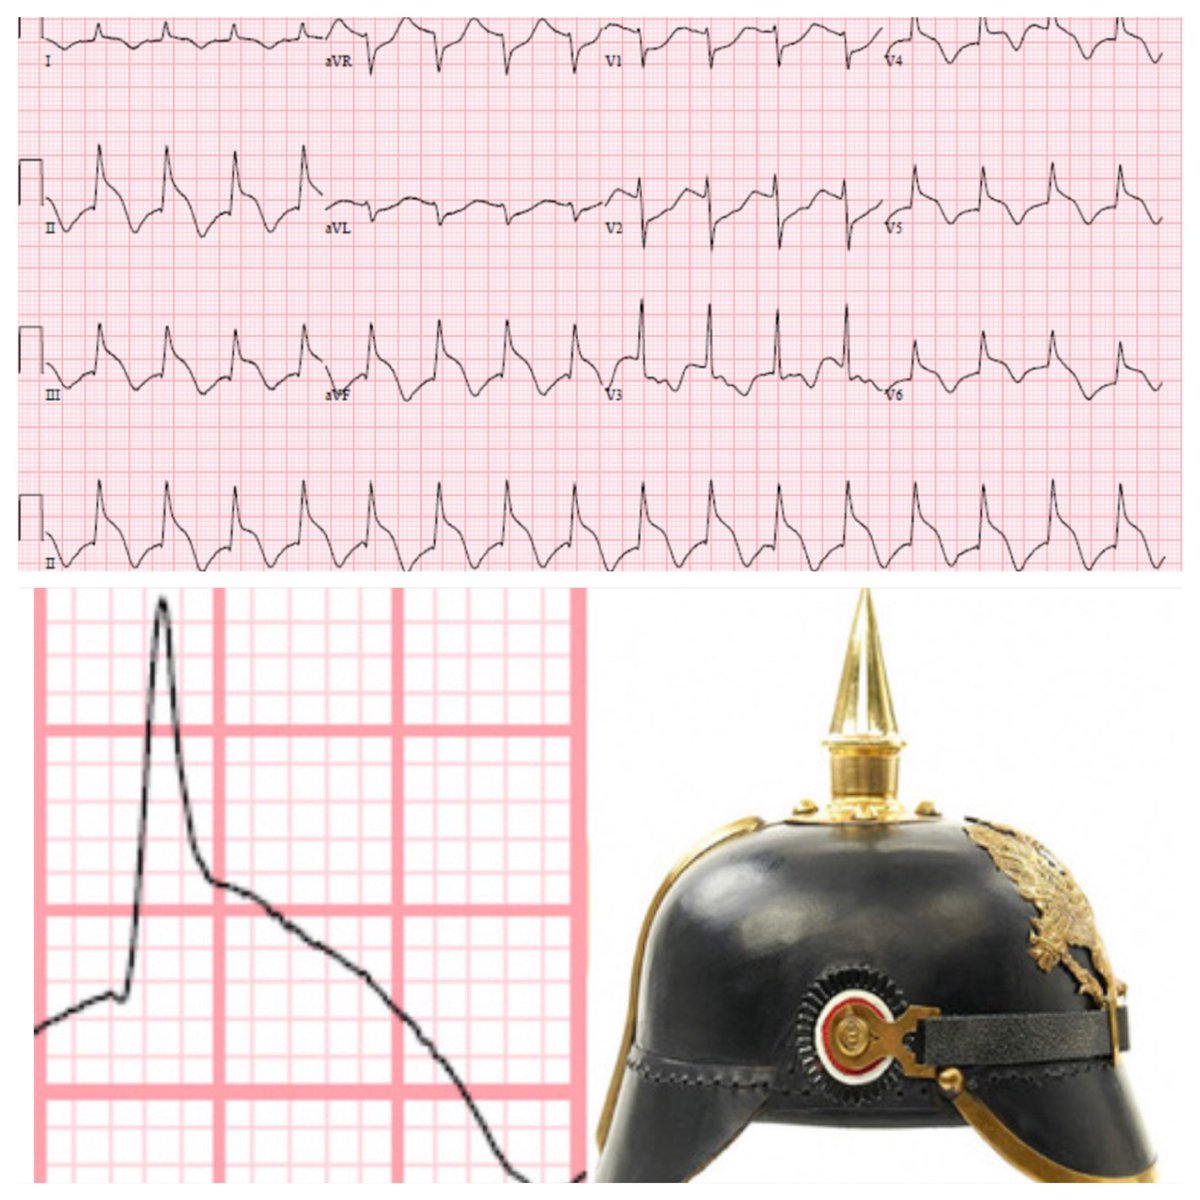 Another Pickelhaube sign but not on #echofirst but on #EKG spiked-helmet sign (SHS): elevation of isoelectric line precedes QRS, followed by a sharp R wave & then convex ST-segment elevation mimics acute MI Adrenergic excess/prolonged repolarization bit.ly/3hVdkmw